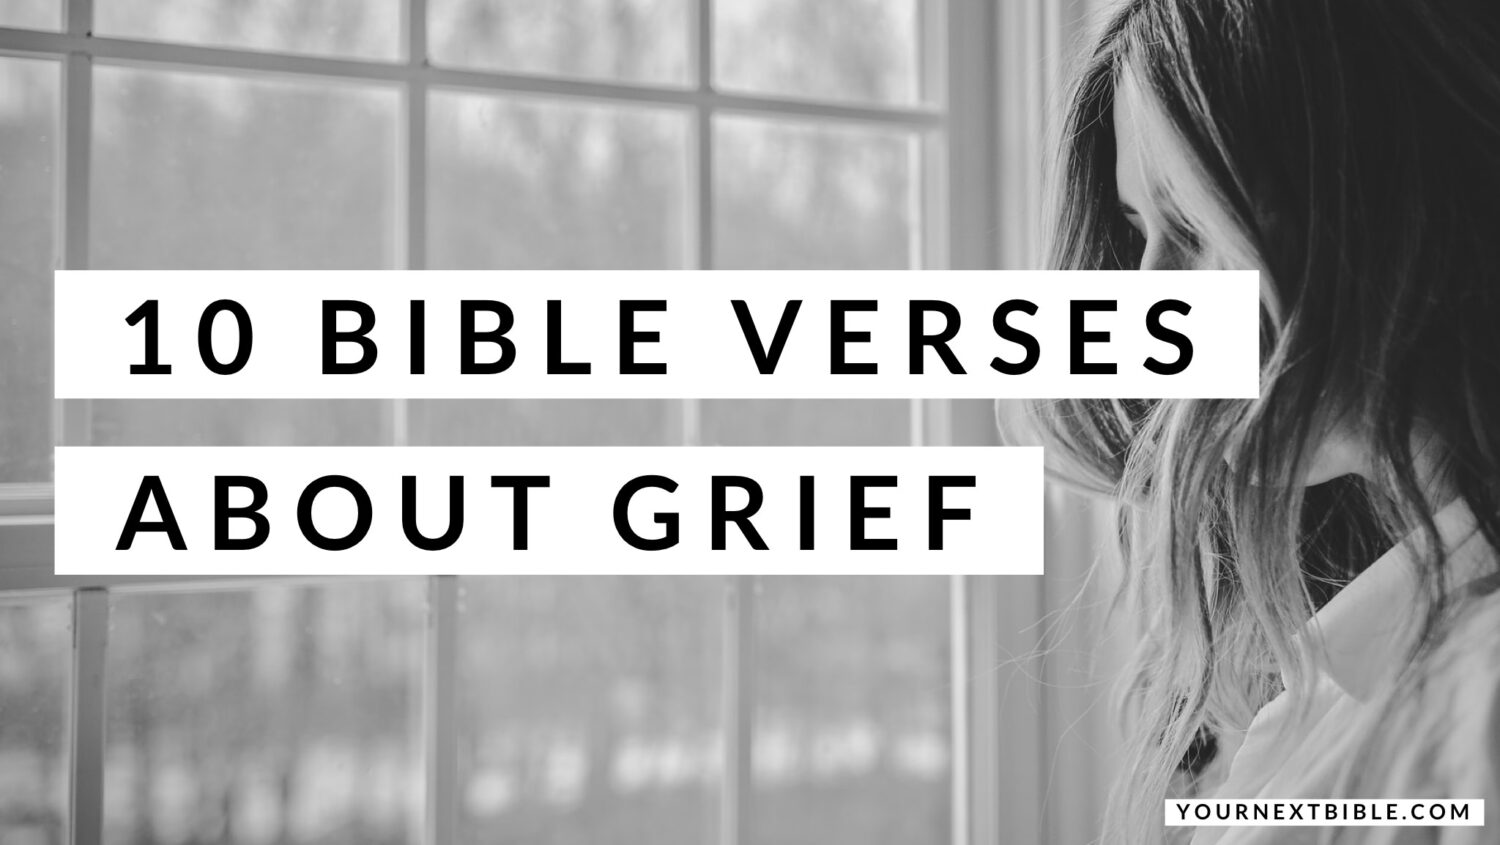 10 Bible Verses for Grief